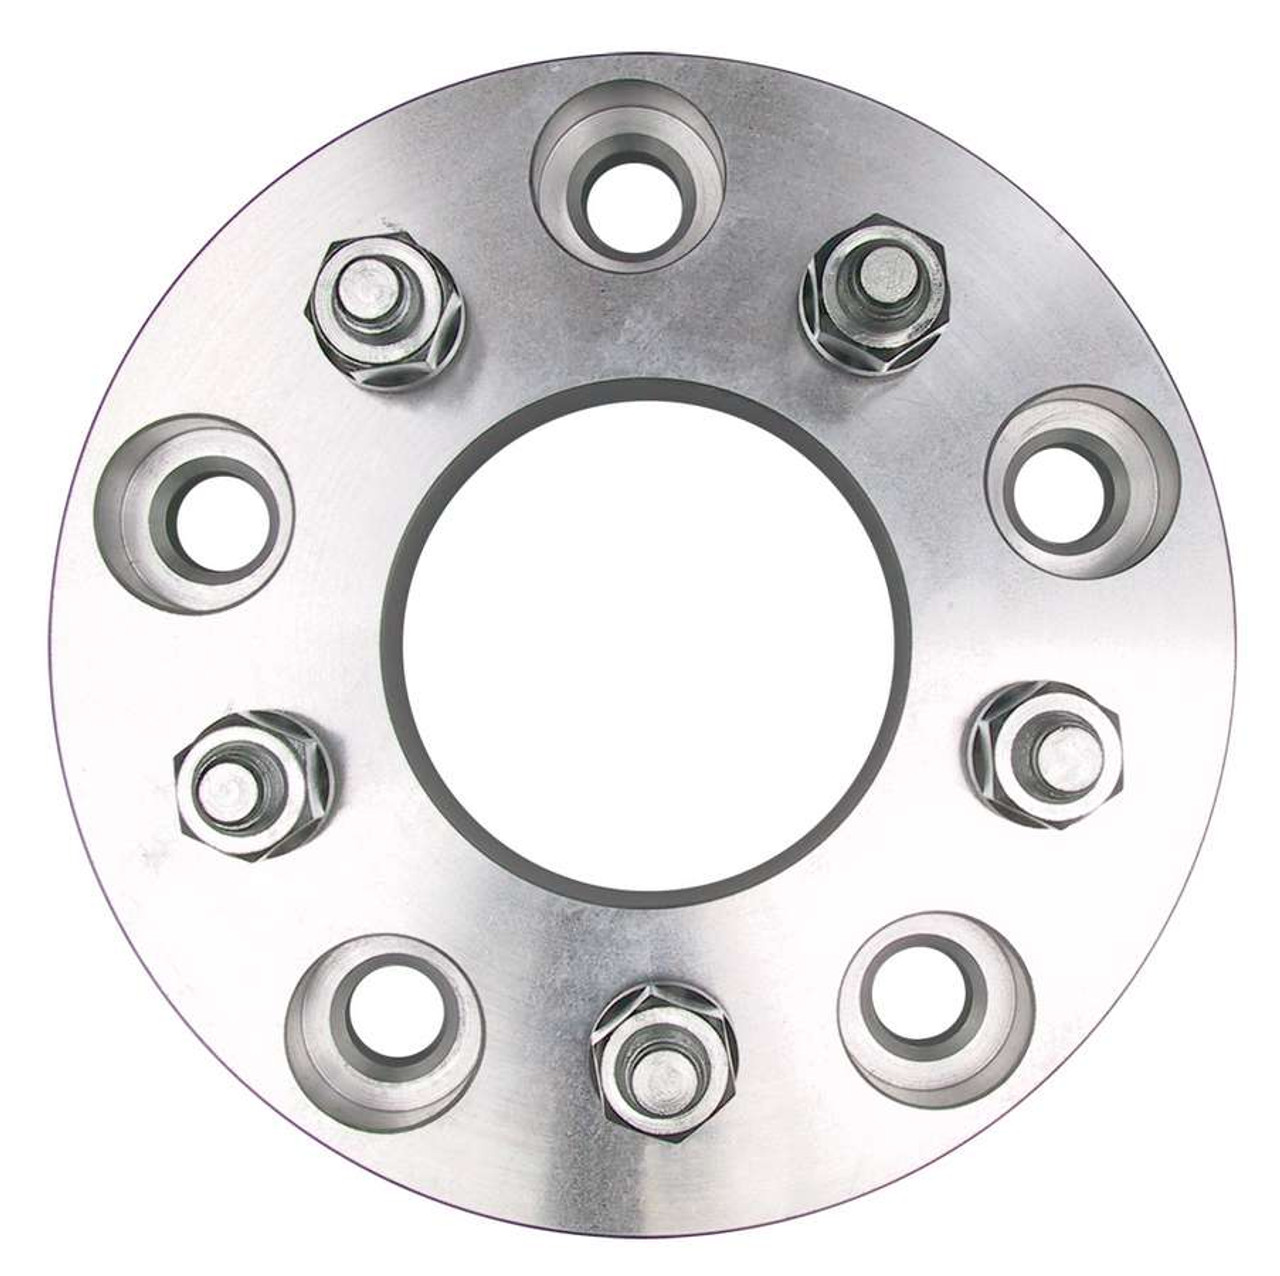 Trans-Dapt Billet Wheel Adapters 5x5.5in to 5x4.75in - TRA3617